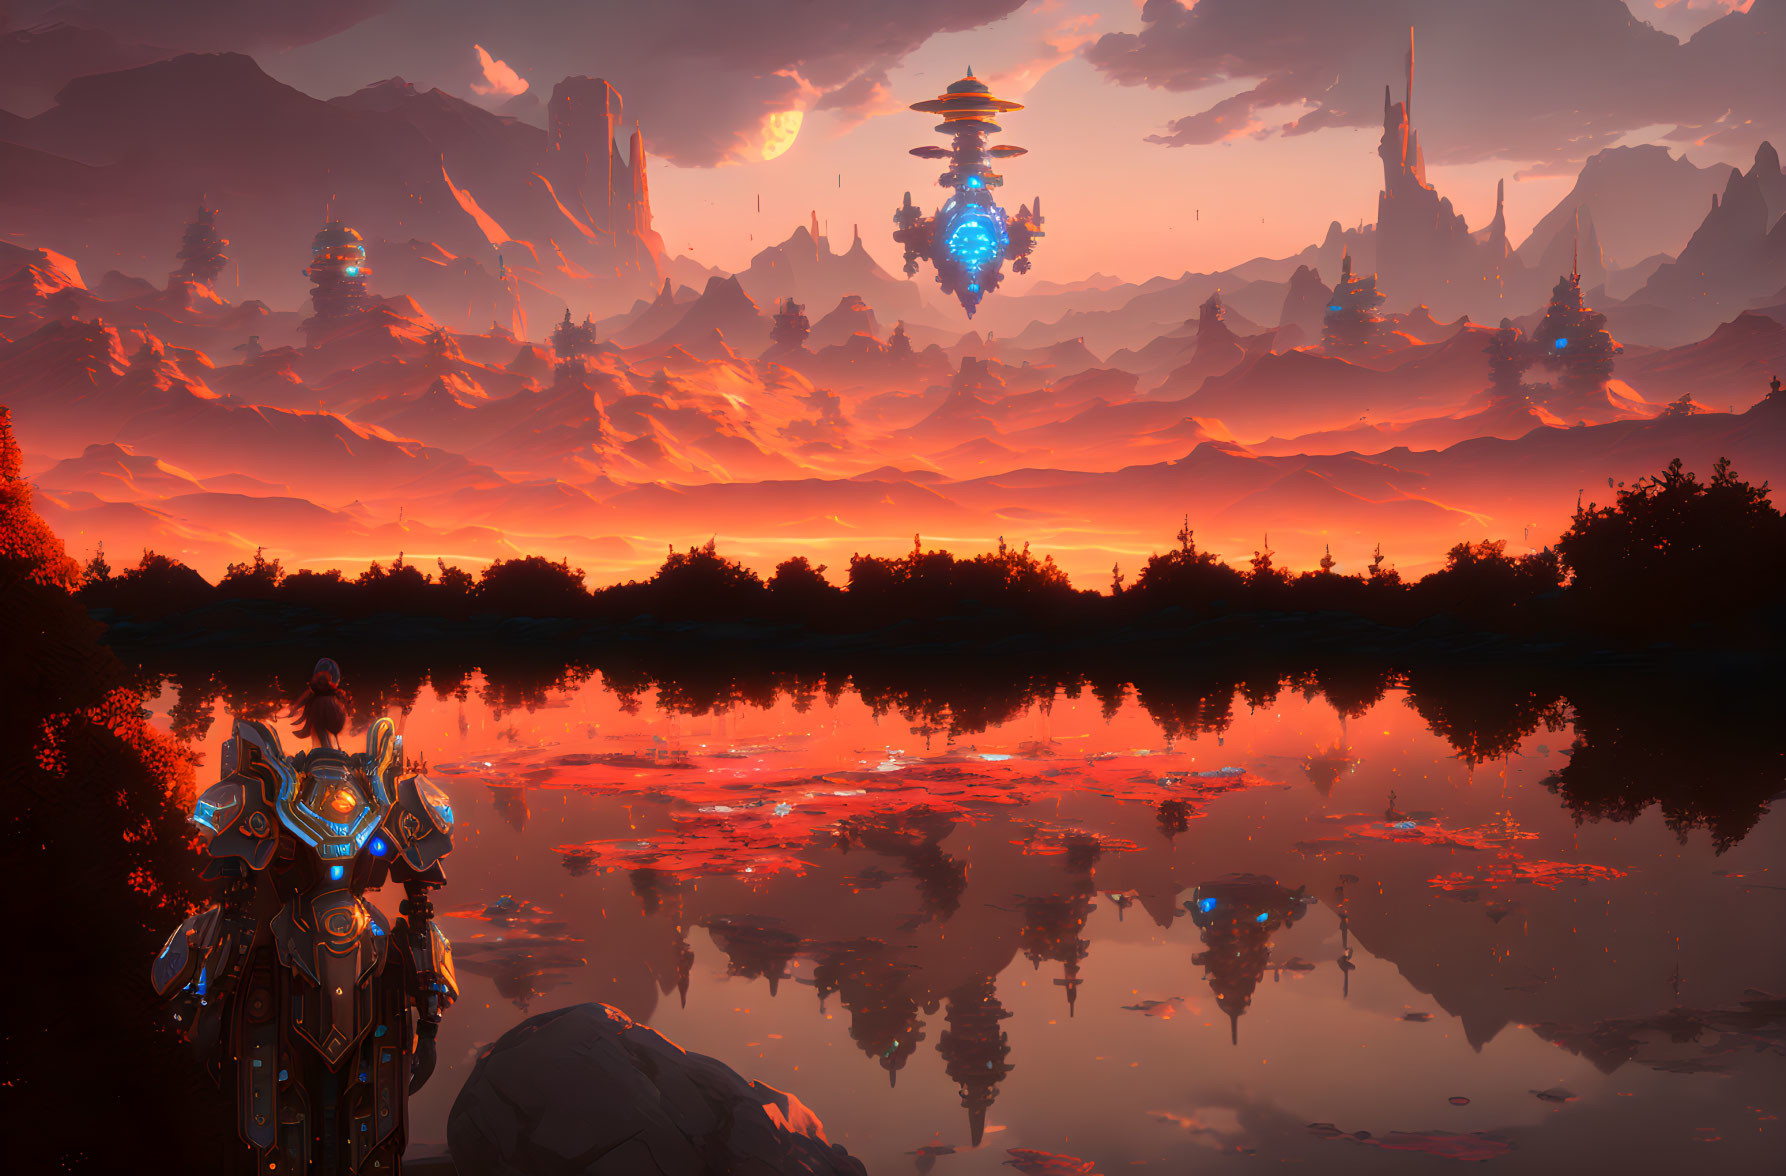 Armored figure in futuristic landscape with red hues and floating structures